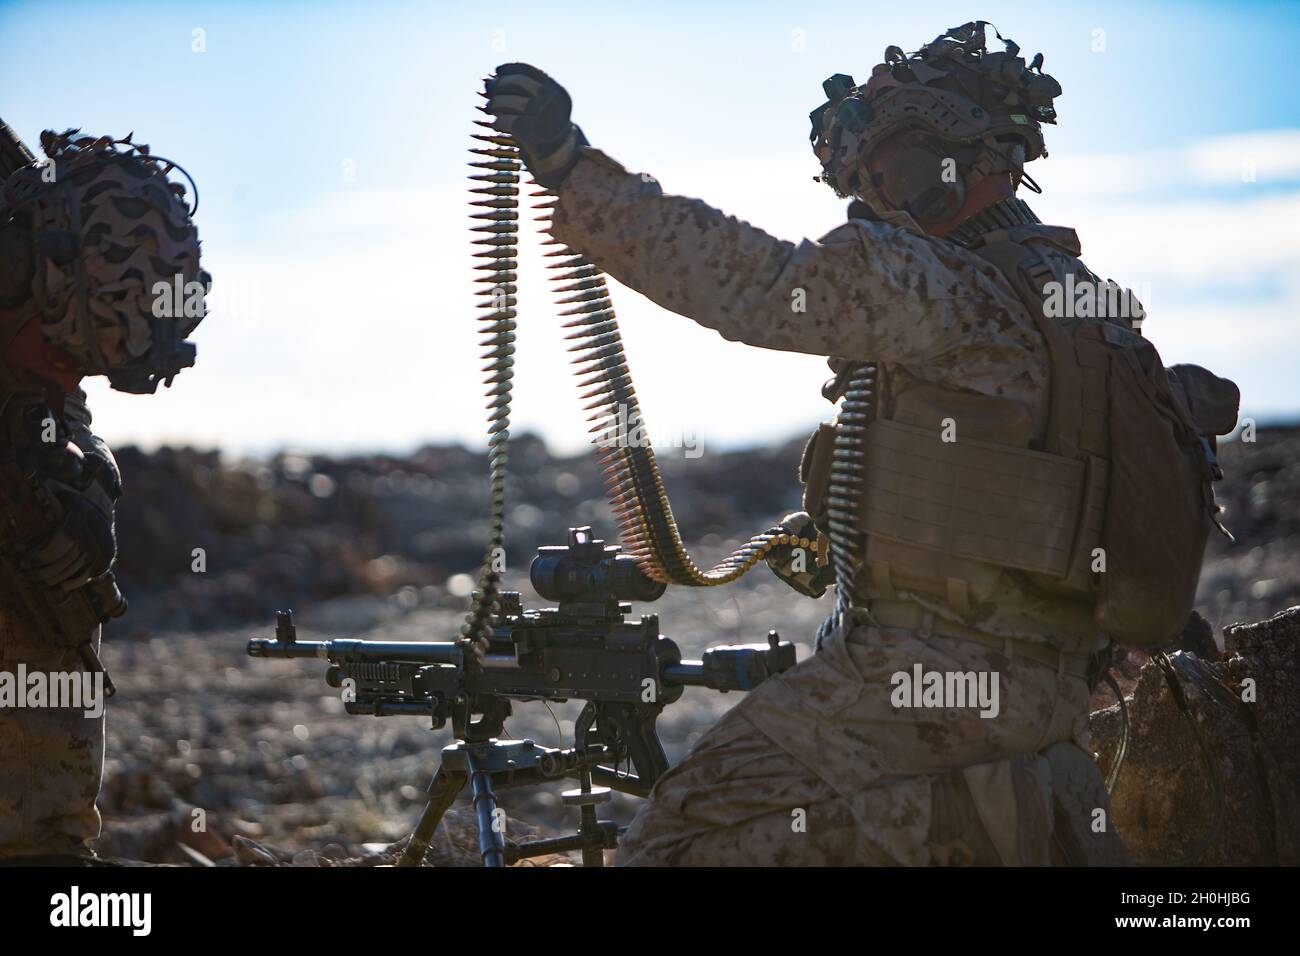 A U.S. Marine with 3rd Battalion, 2d Marine Regiment, 2d Marine Division, attached to 3d Marines, prepares ammunition for an M240B machine gun on Range 400 as part of Service Level Training Exercise 1-22 on Marine Corps Air Ground Combat Center Twentynine Palms, California, Oct.9, 2021. Range 400 provides Marine Corps ground units the opportunity to test and enhance their ability to command and control forces in a contested environment. (U.S. Marine Corps photo by Lance Cpl. Ryan Ramsammy) Stock Photo